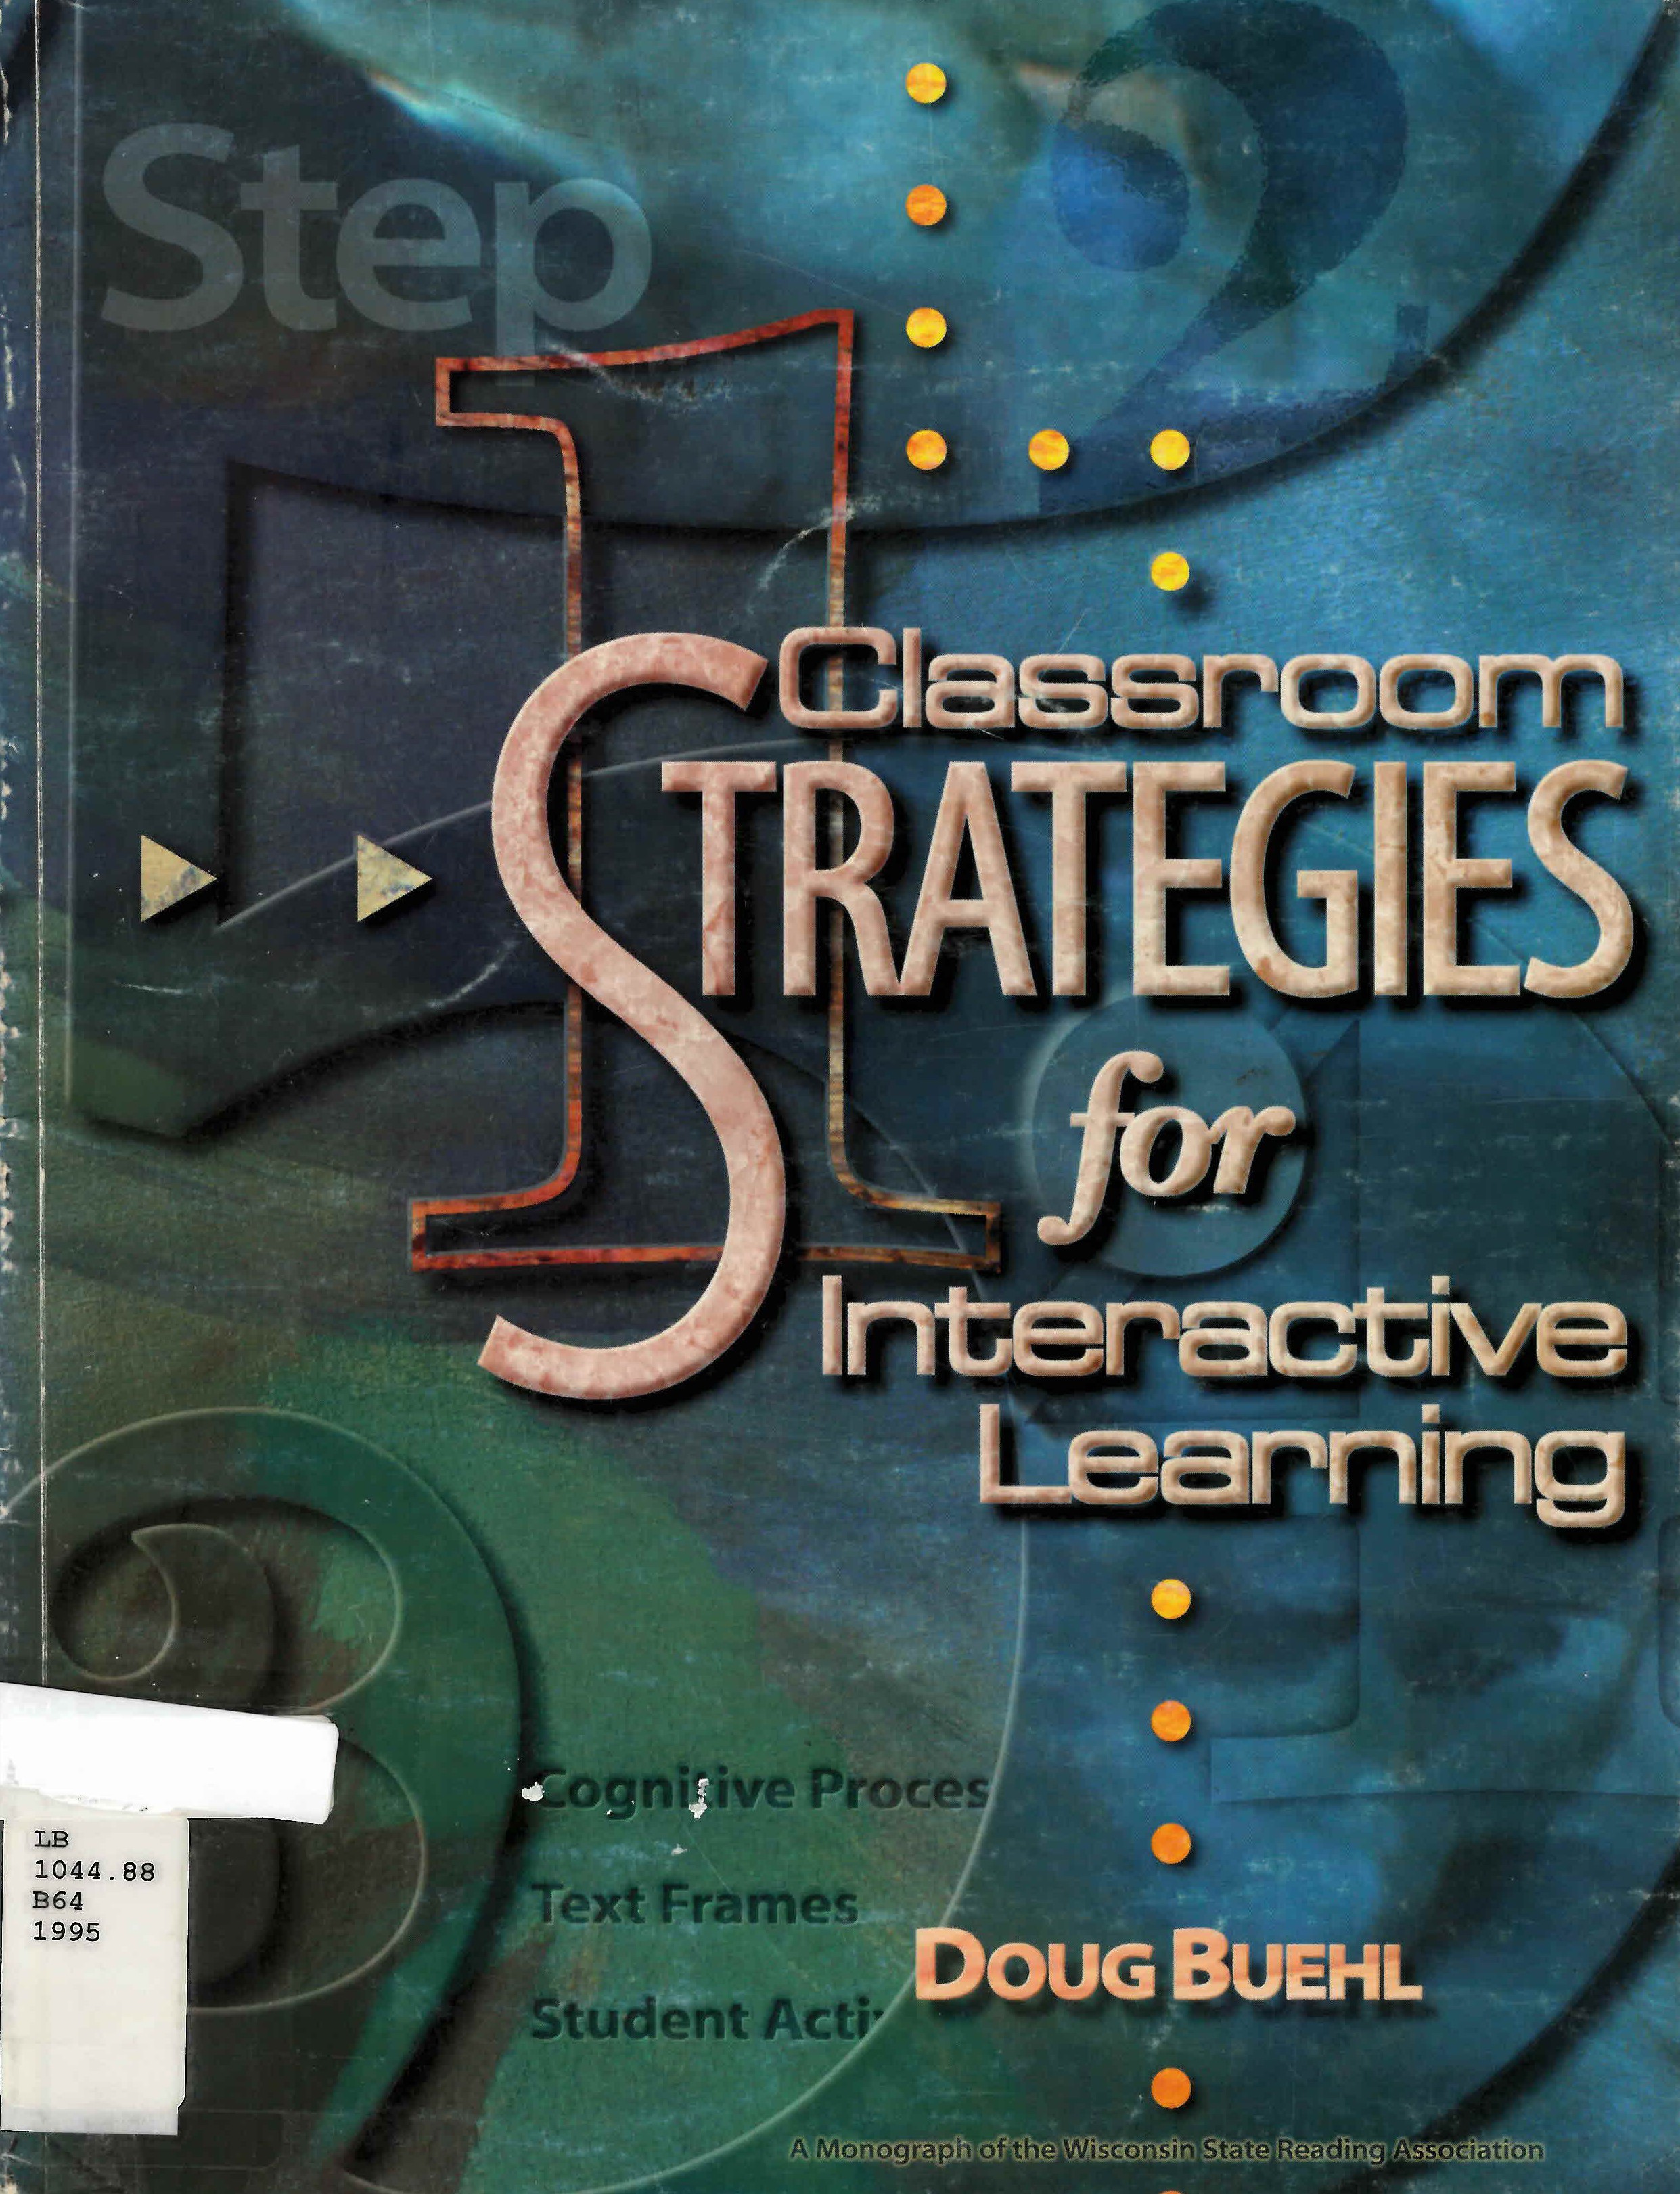 Classroom strategies for interactive learning